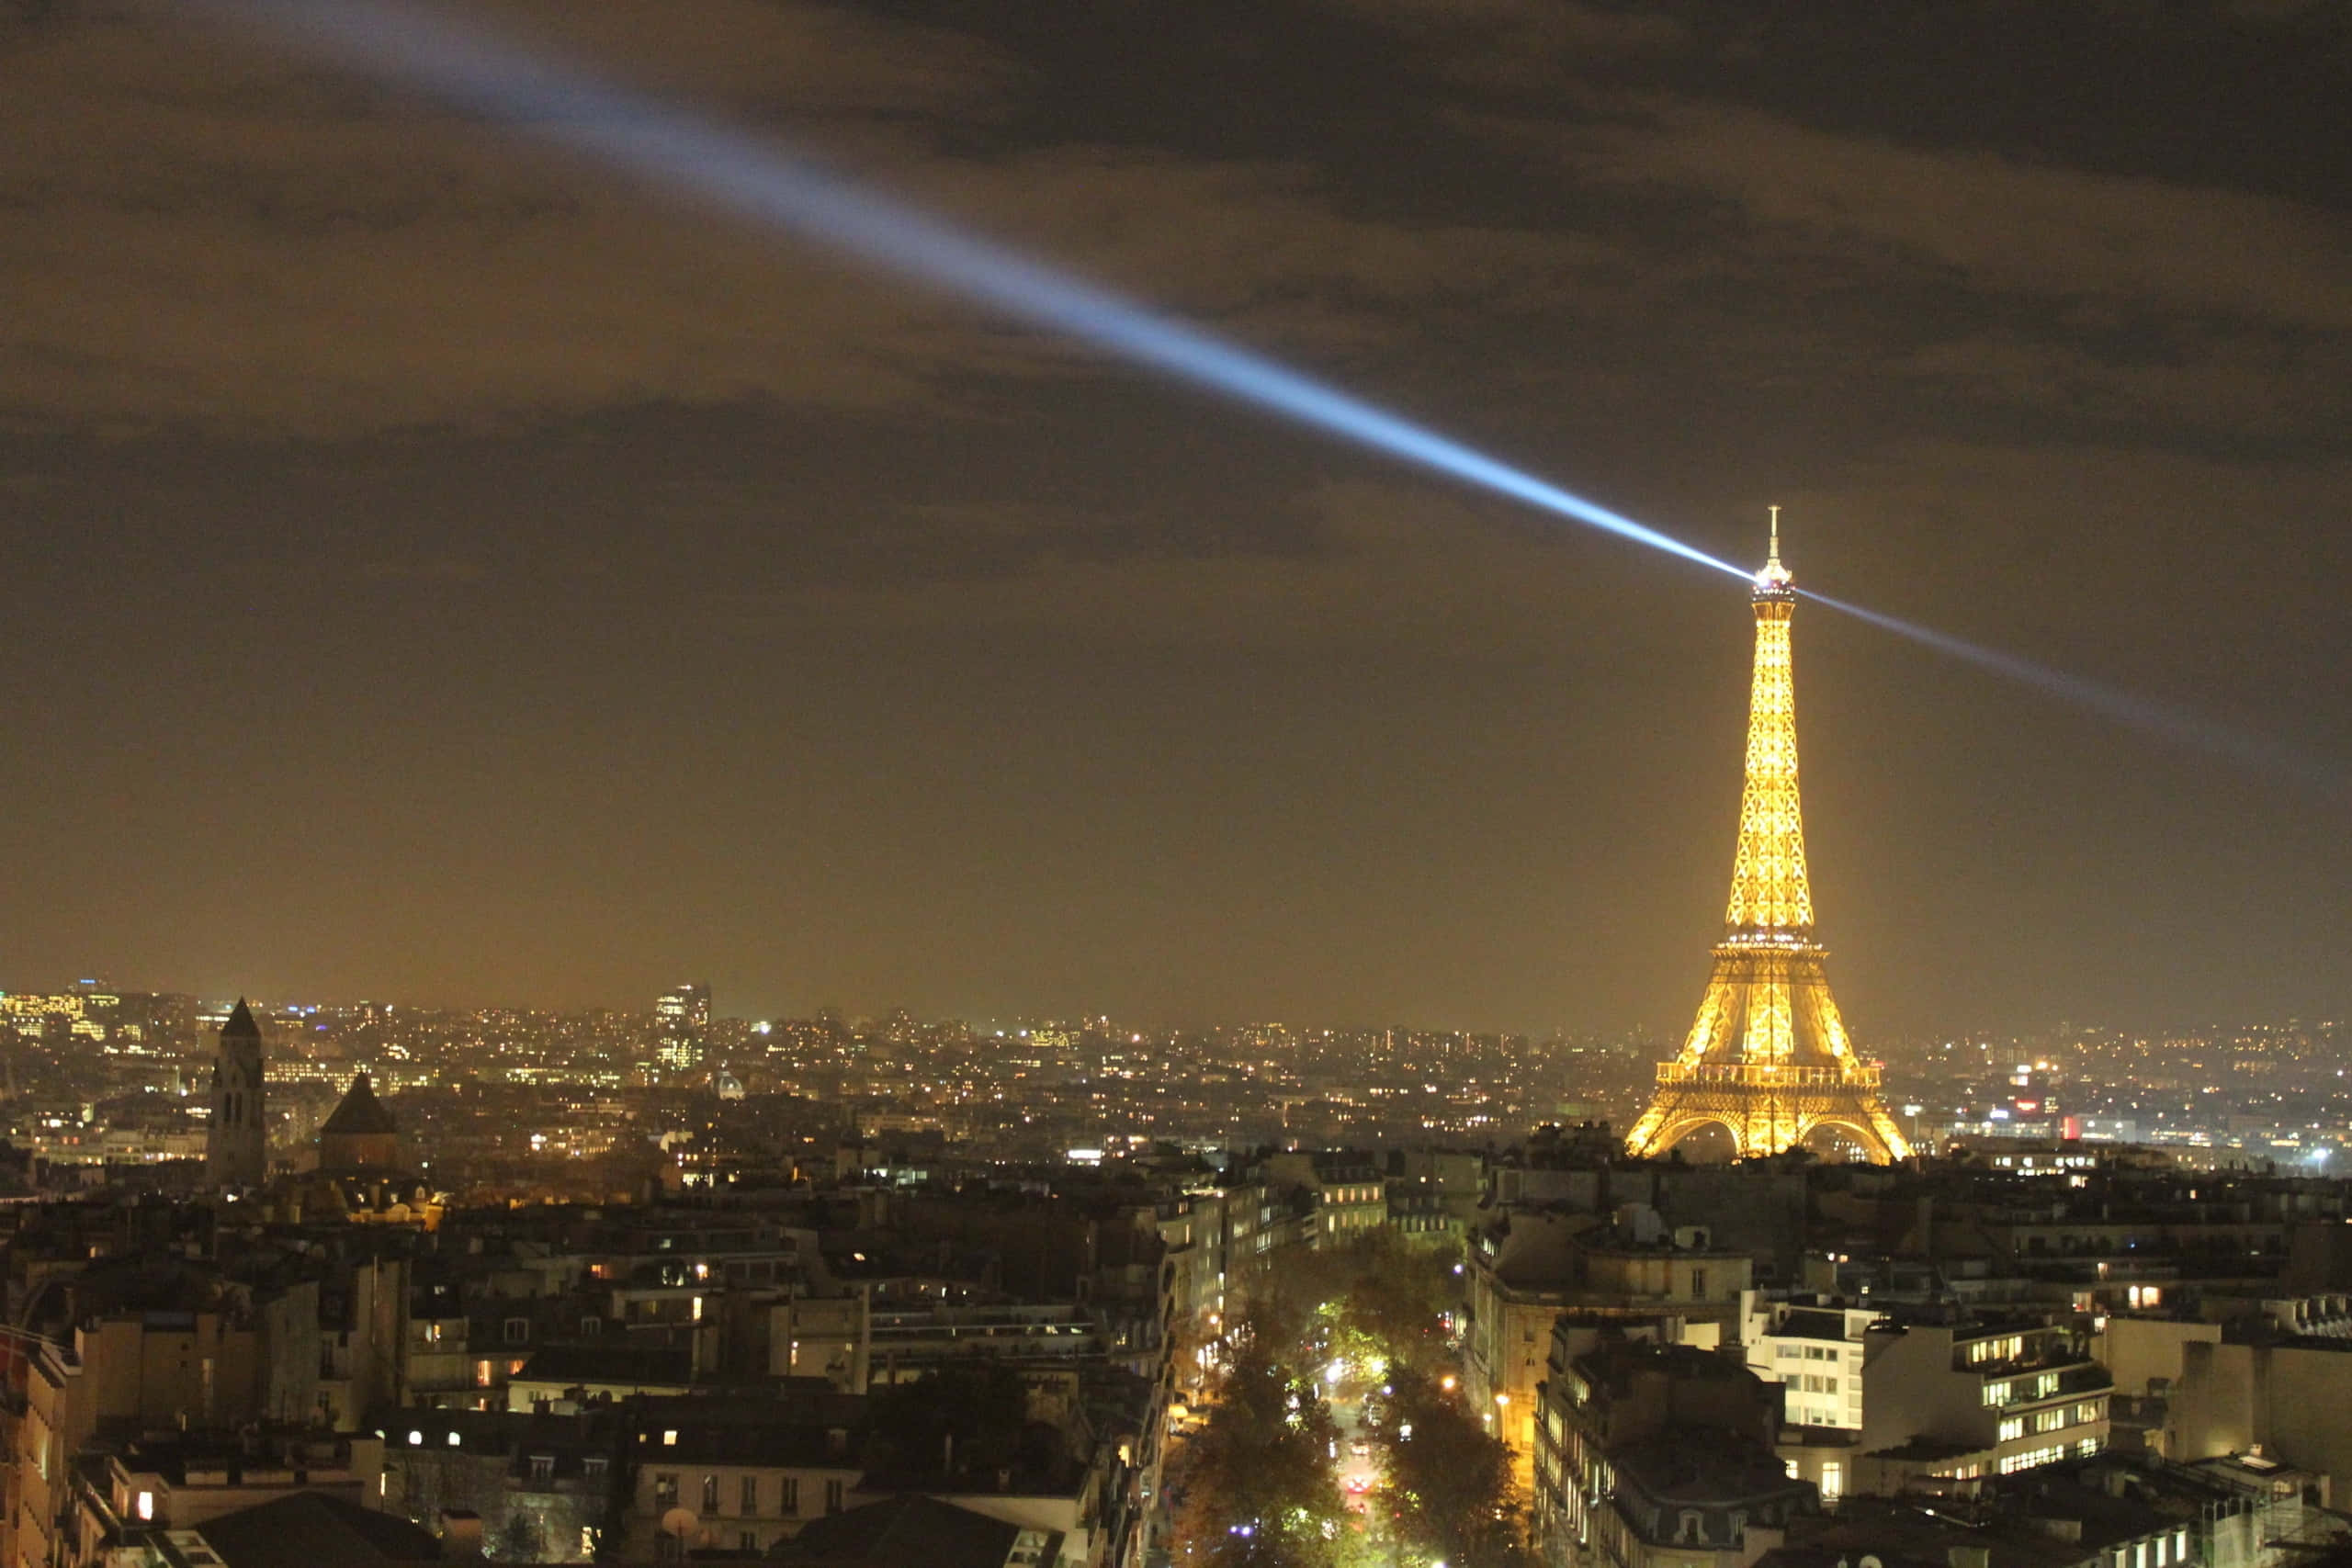 The Eiffel Tower sparkles in the night sky over Paris